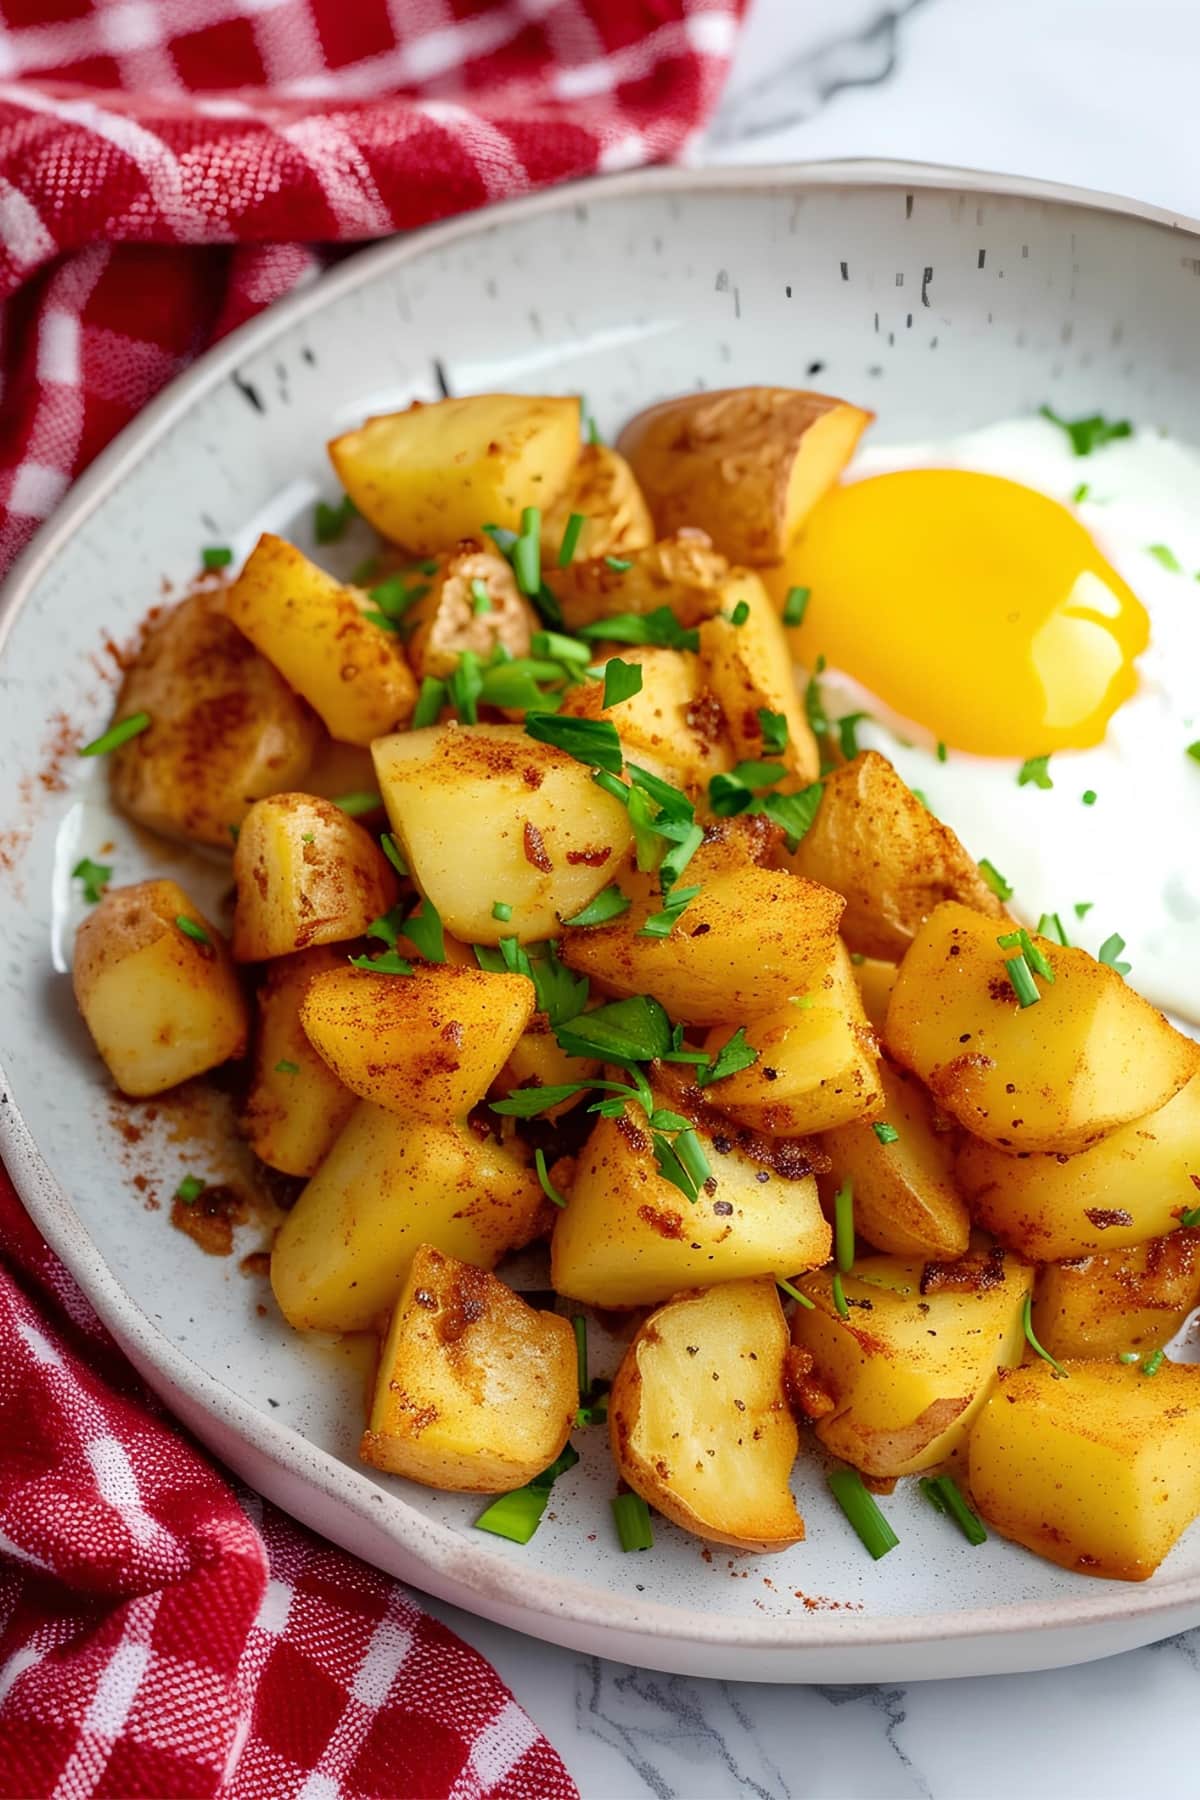 Fried potatoes with a sunny-side-up egg on a plate, a delicious and hearty breakfast dish